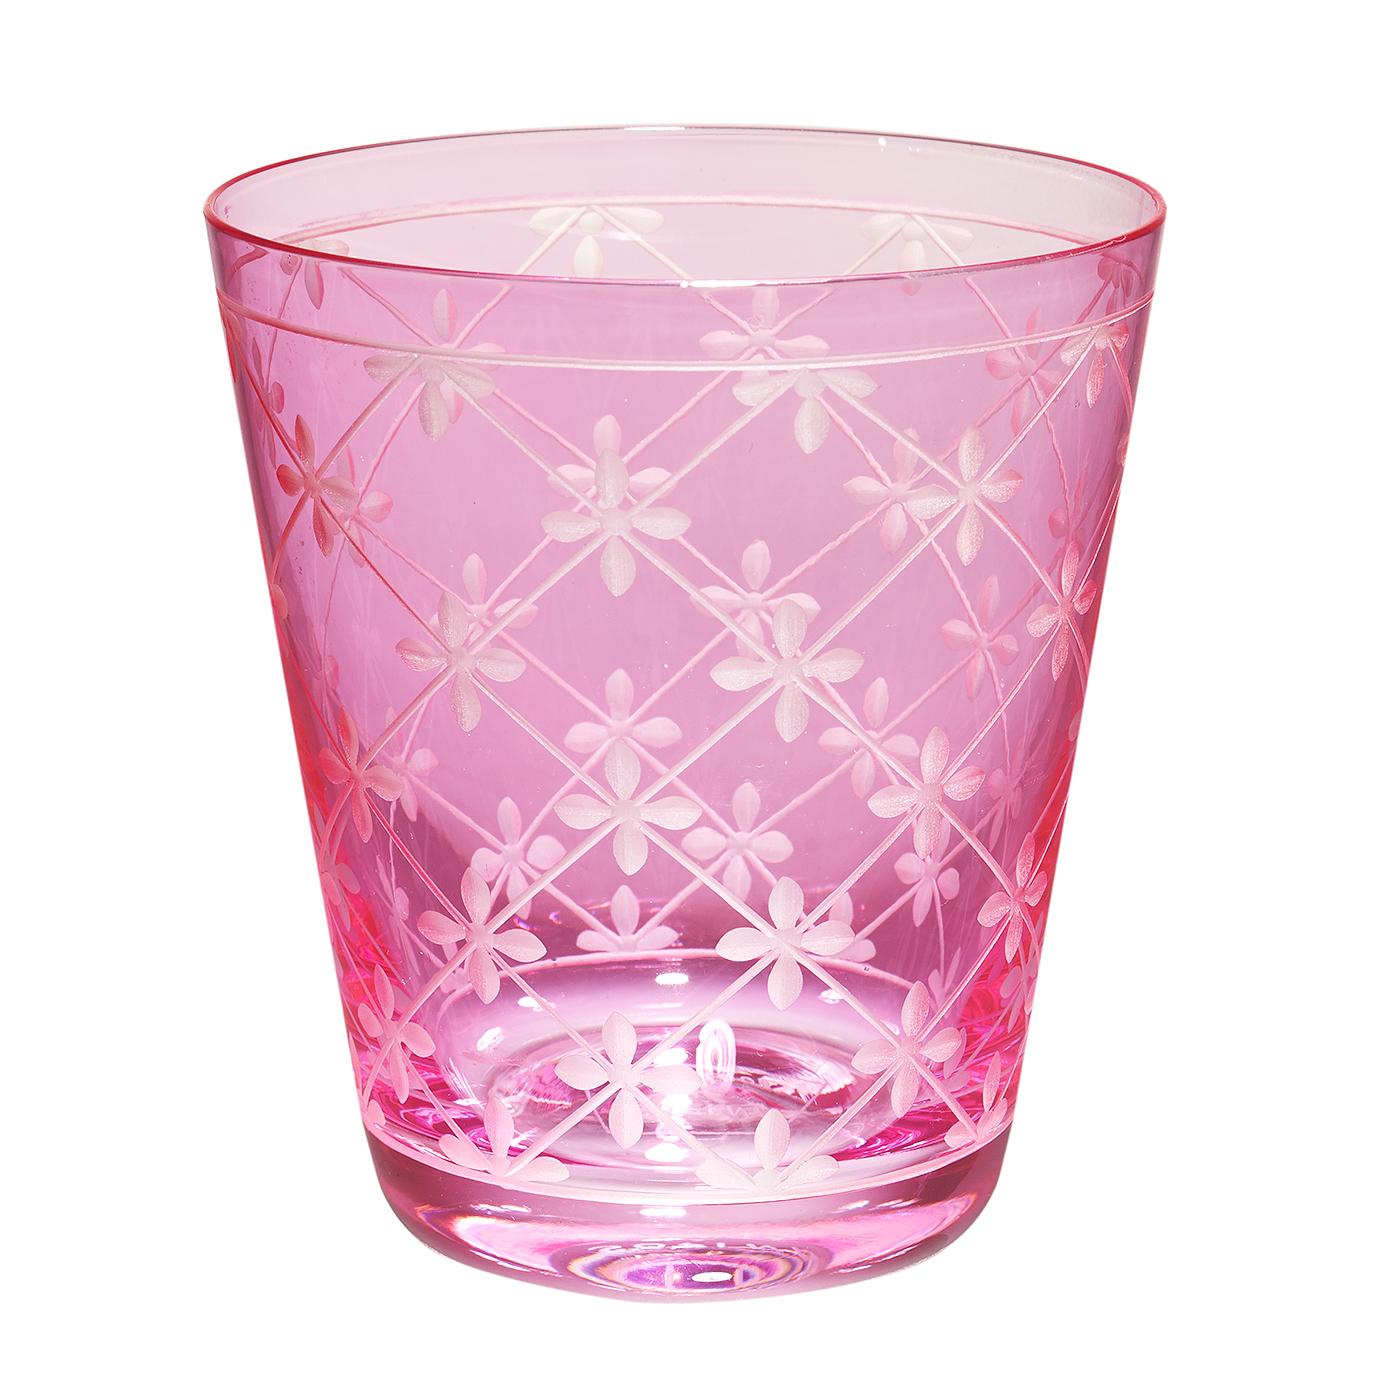 Set of six hand blown tumbler in pink crystal with a hand-edged country style decor. The decor shows a hand-engraved decor all-over the glass. Handmade in Bavaria/Germany. Can be ordered in different colors like pink, green and blue. Colored crystal